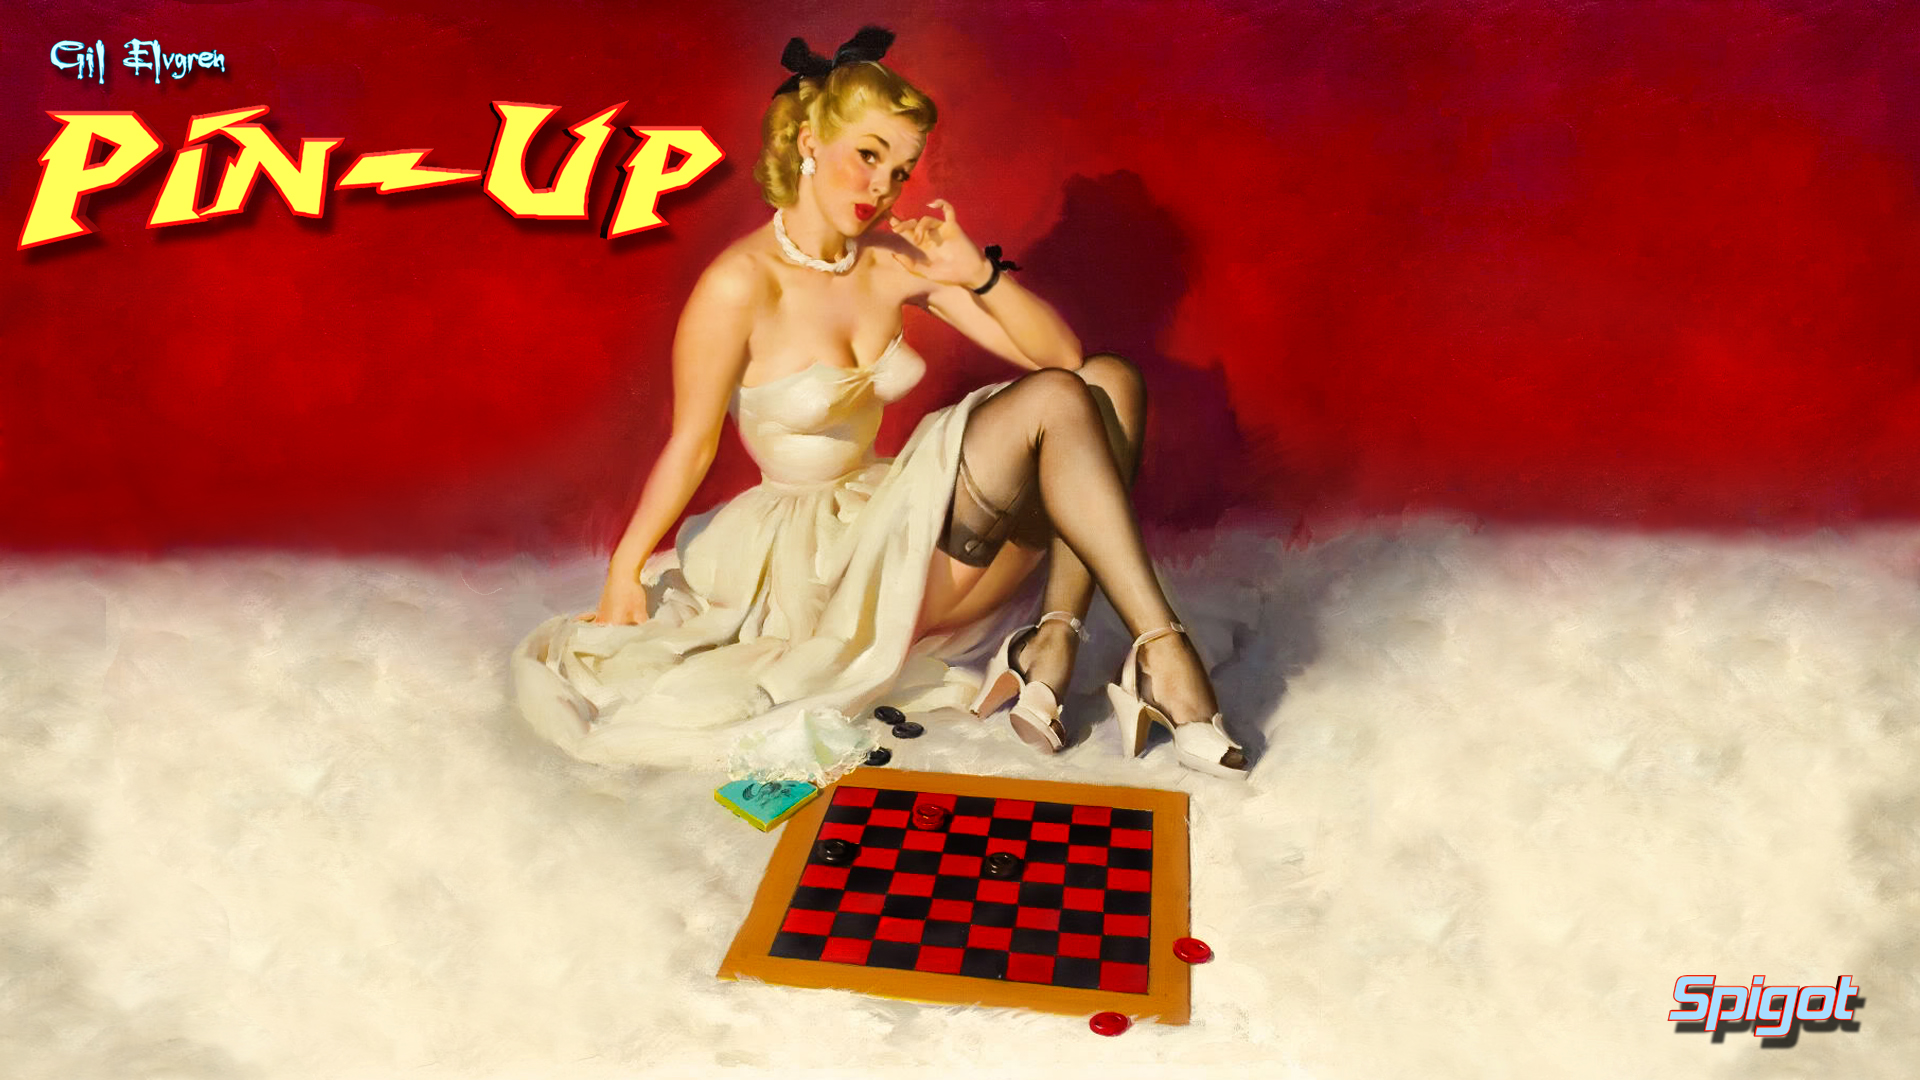 Gil Elvgren Pinup Check And Double